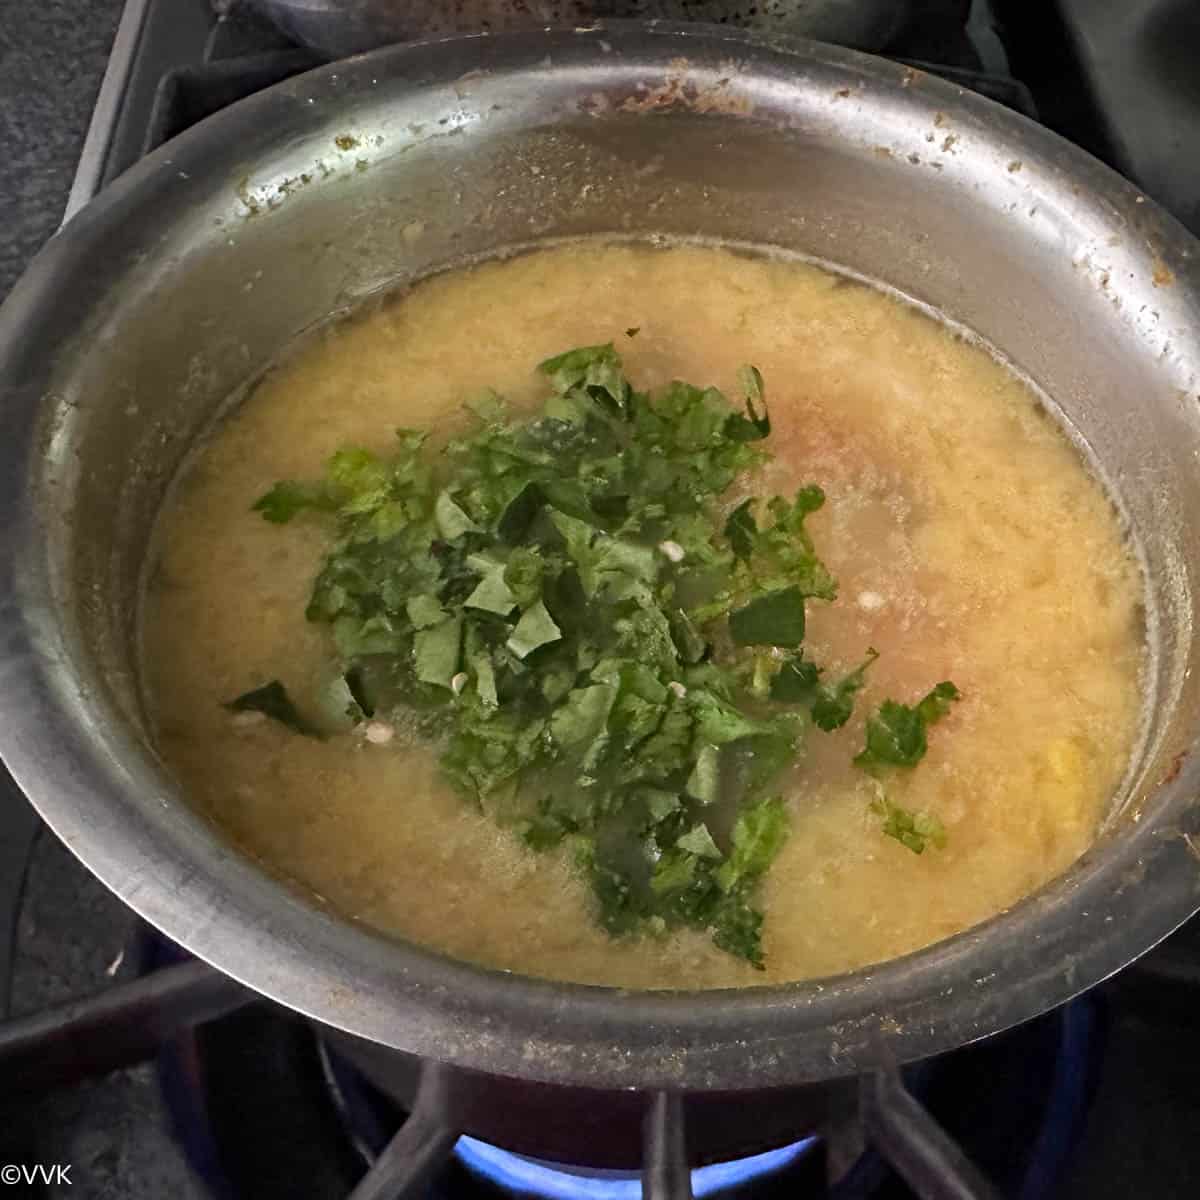 adding salt and herbs to the moong dal